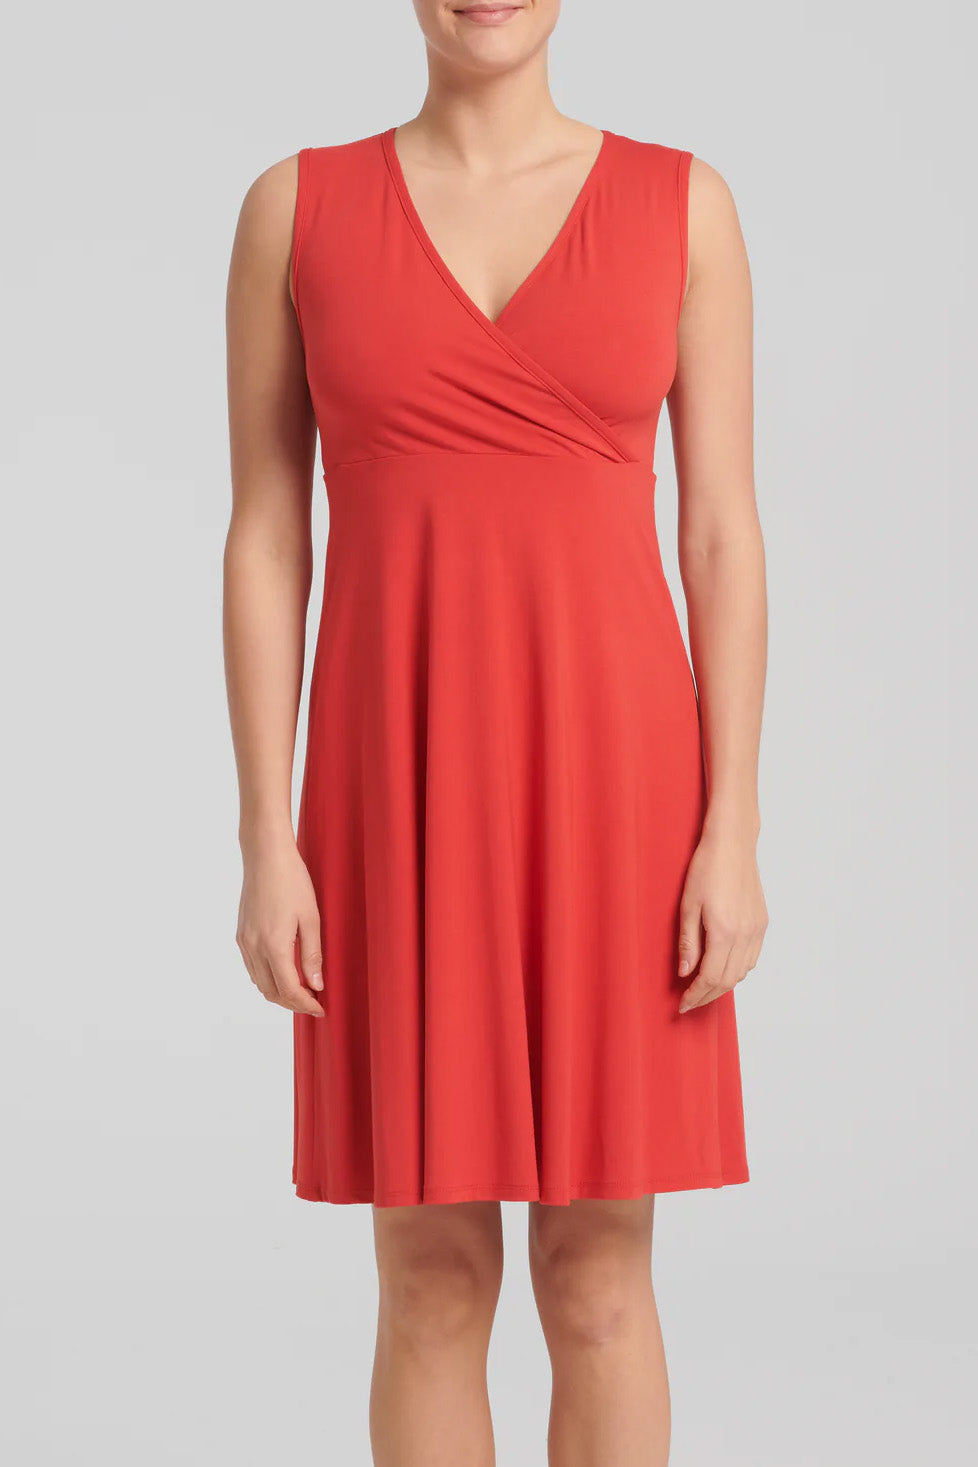 Ayesha Dress by Kollontai, Tomato, wrap-over neckline, wide straps, empire waist, loose fit through the bodice, knee-length, pill-resistant viscose, sizes XS-XXL, made in Quebec